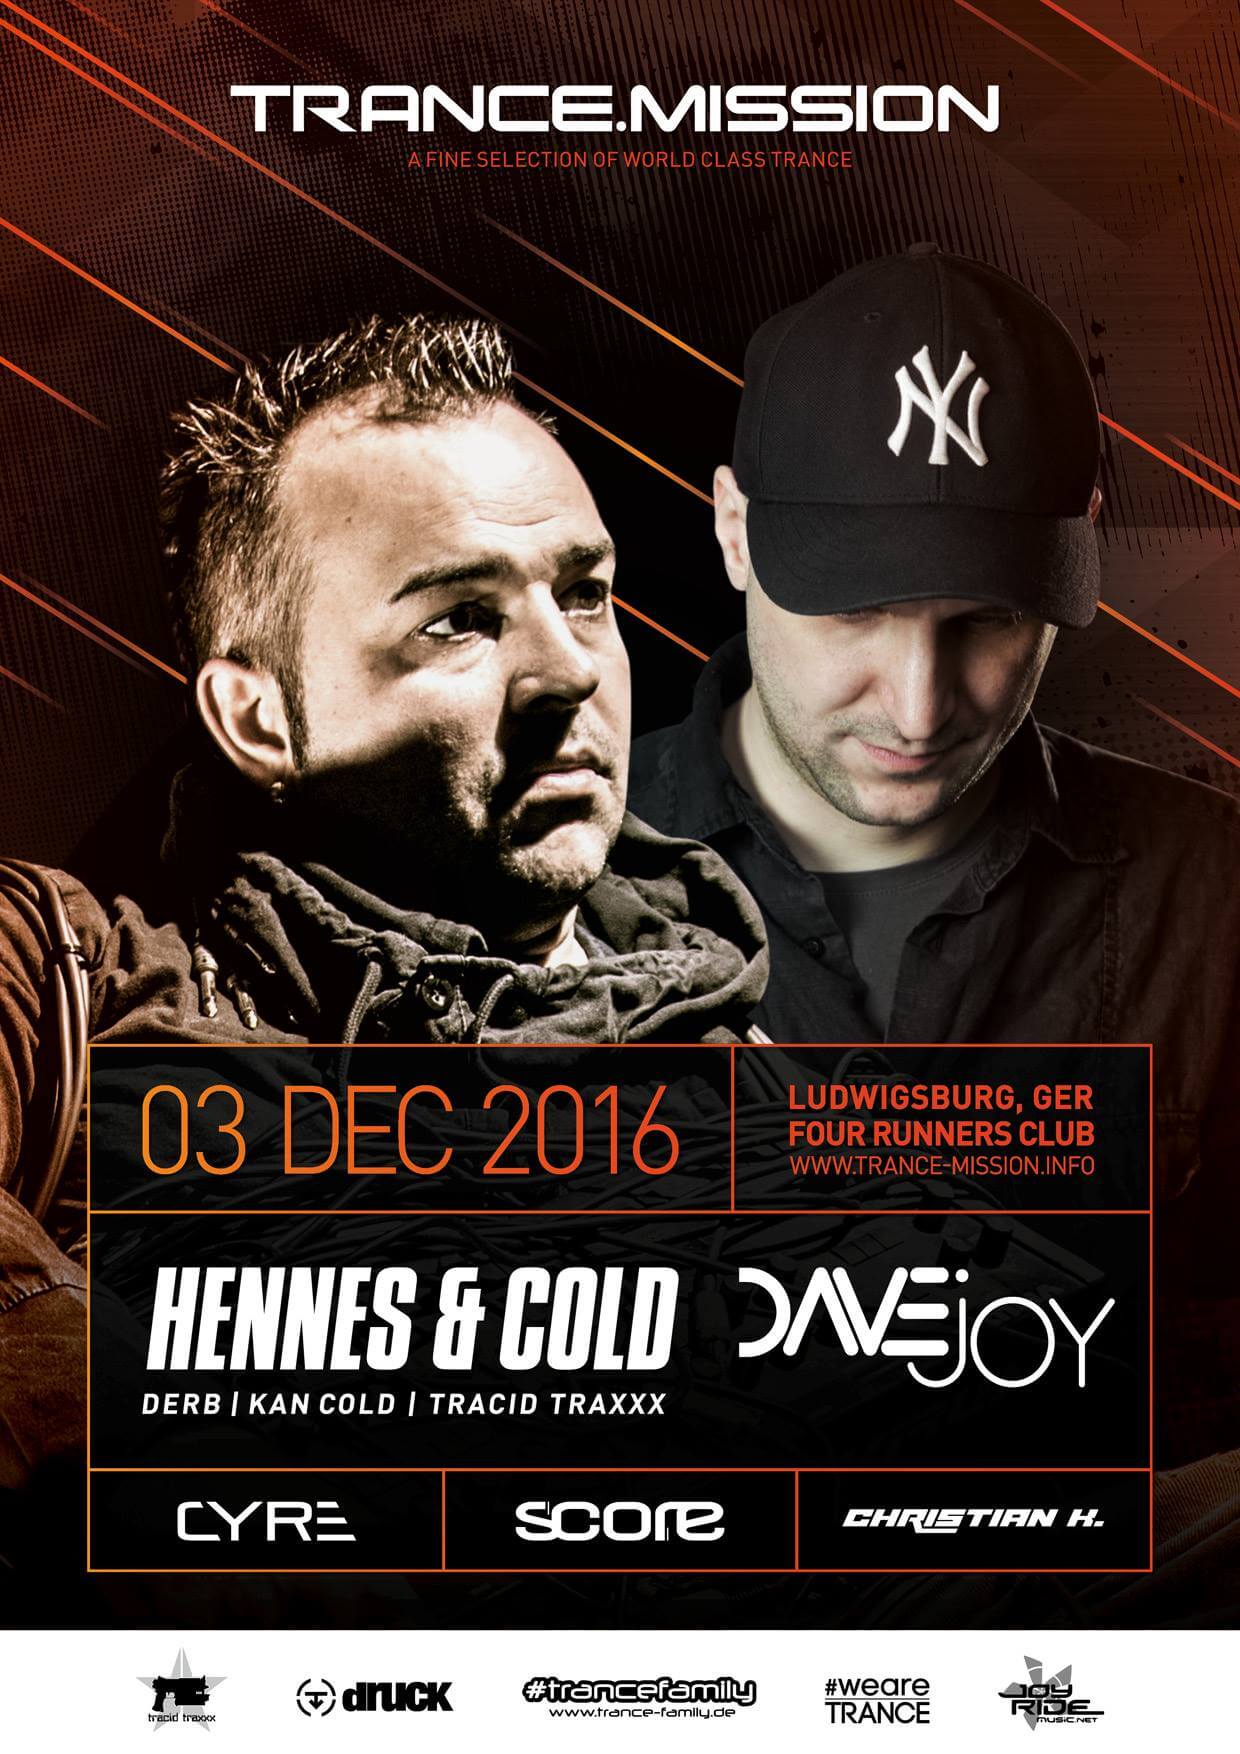 Trance.Mission presents Timeless Classics with Hennes and Cold, Dave Joy at Four Runners Club, Ludwigsburg, Germany on 3rd of December 2016